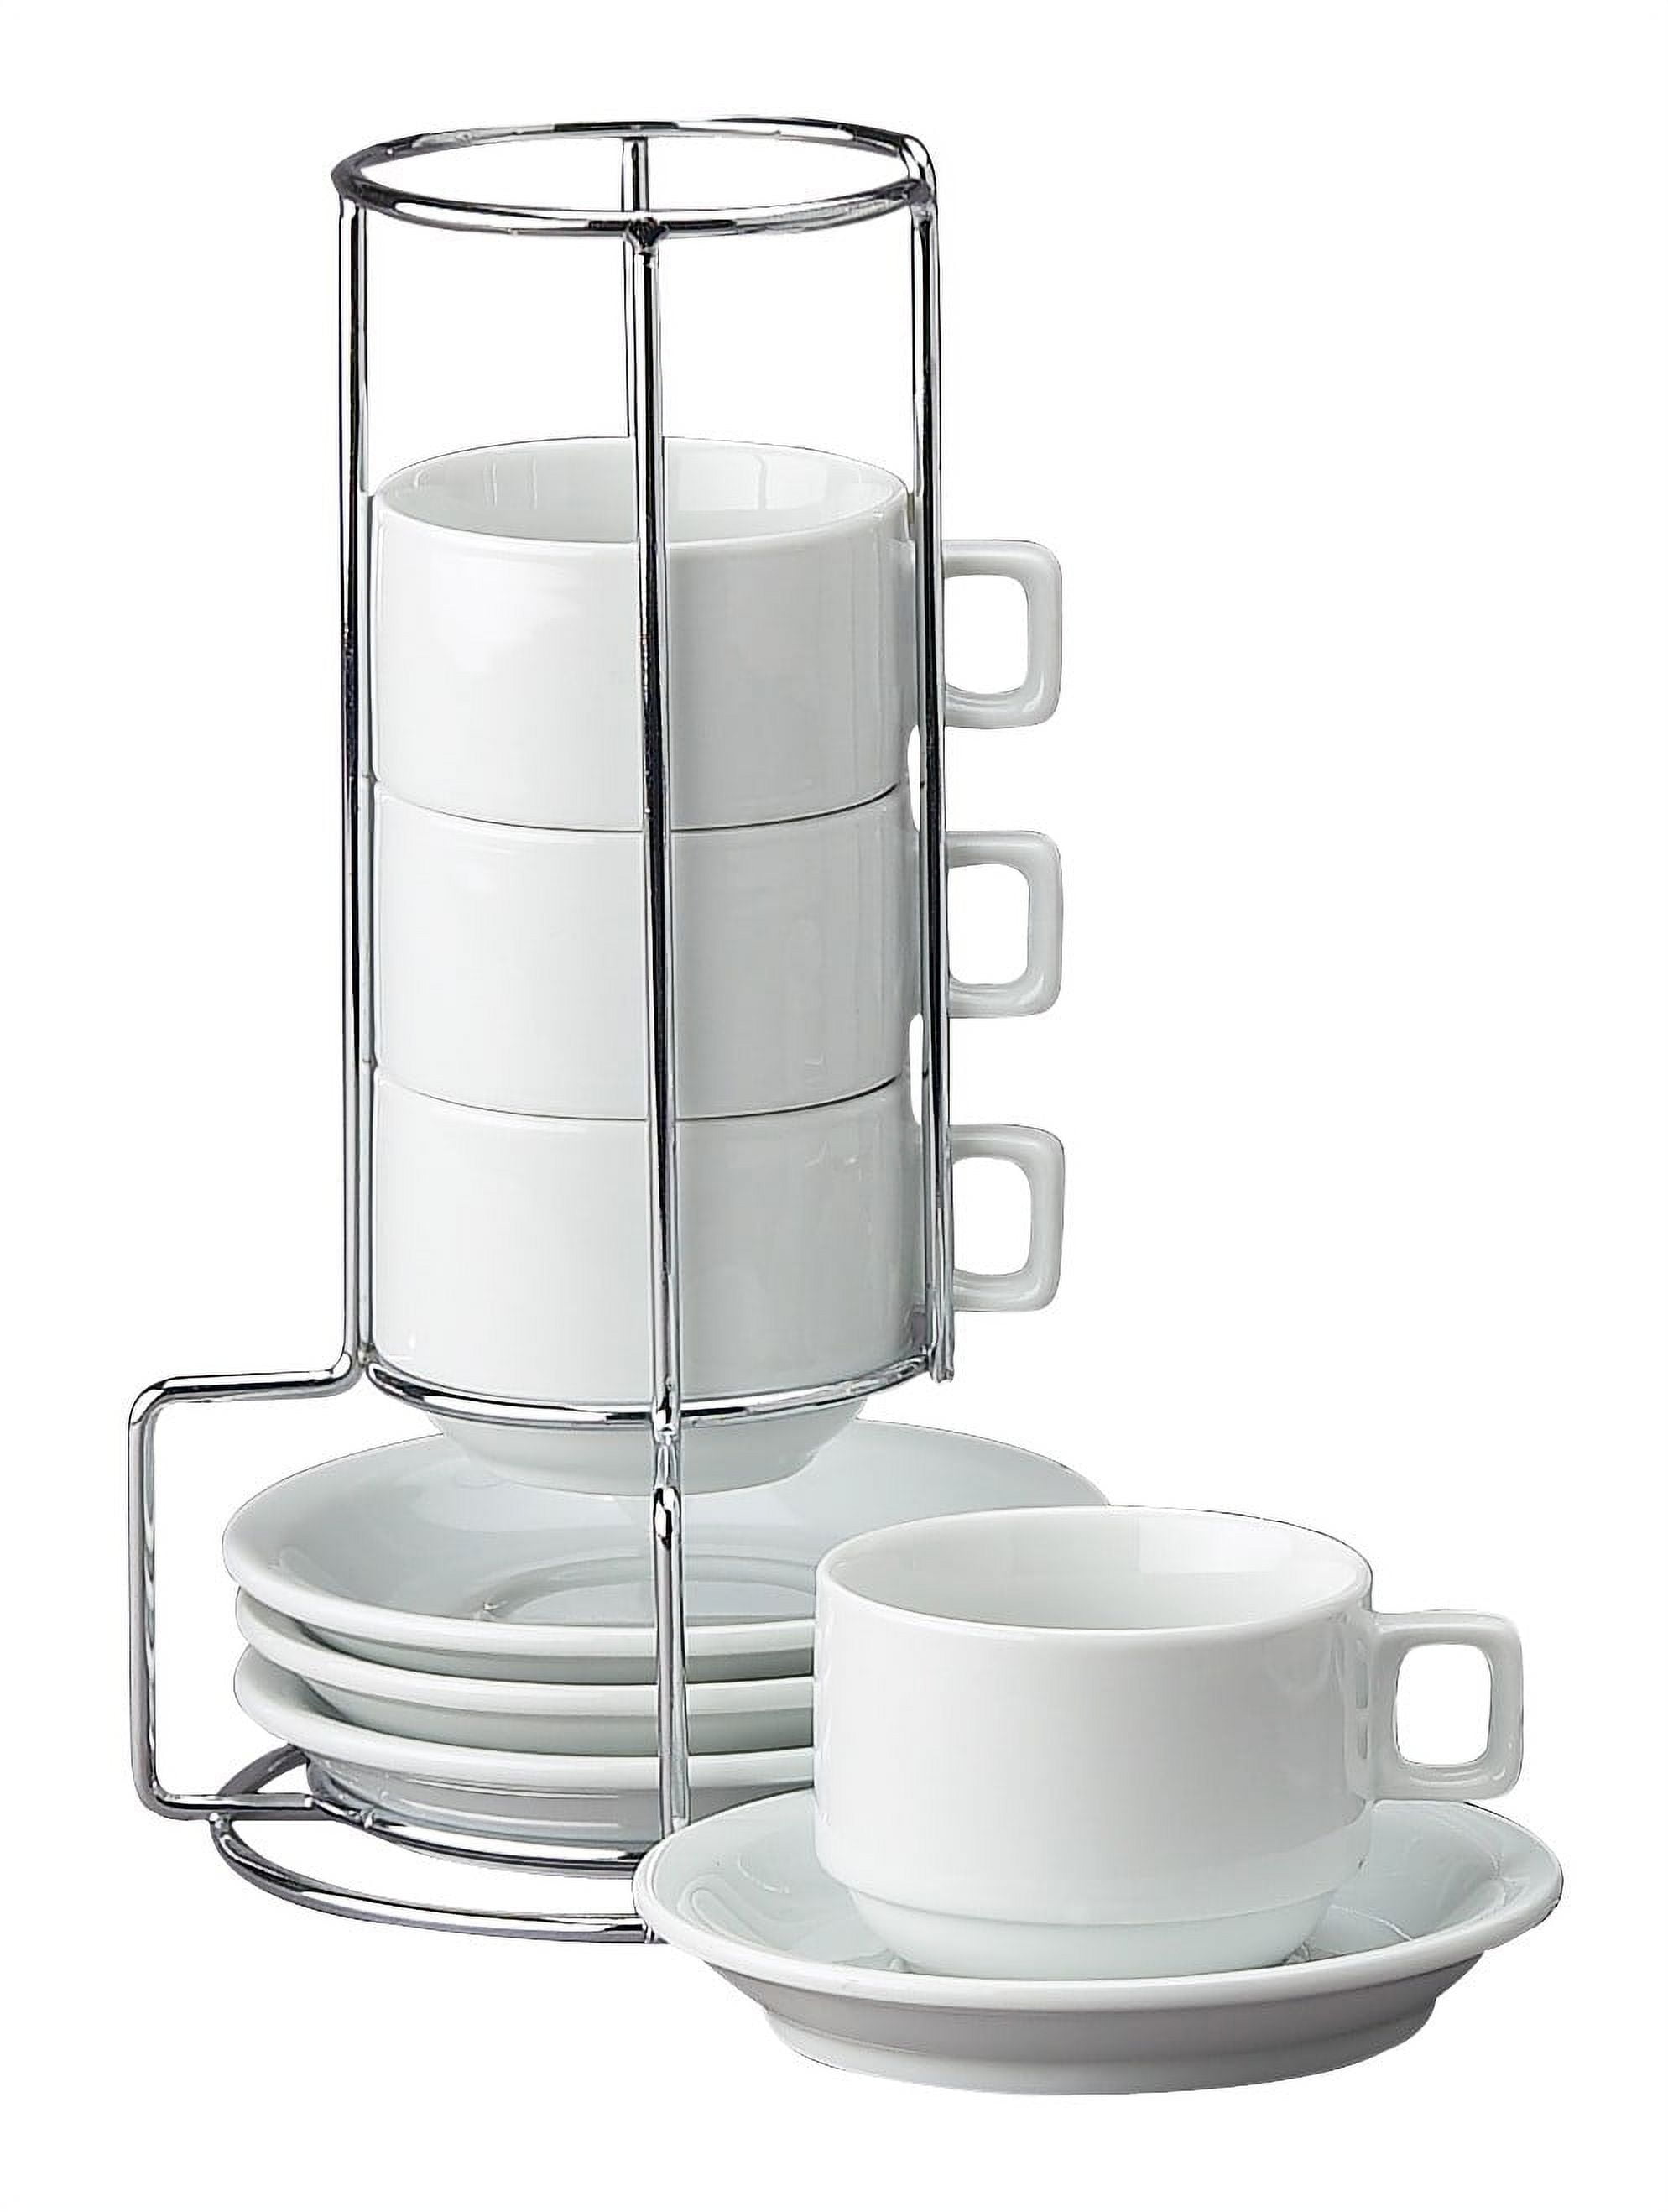 Hic 9-Piece Stackable Espresso Coffee Tea Set, Fine White Porcelain, Set  Includes 4 (4-Ounce) Cups With Matching Saucers And Metal Stand, Gift Boxed  